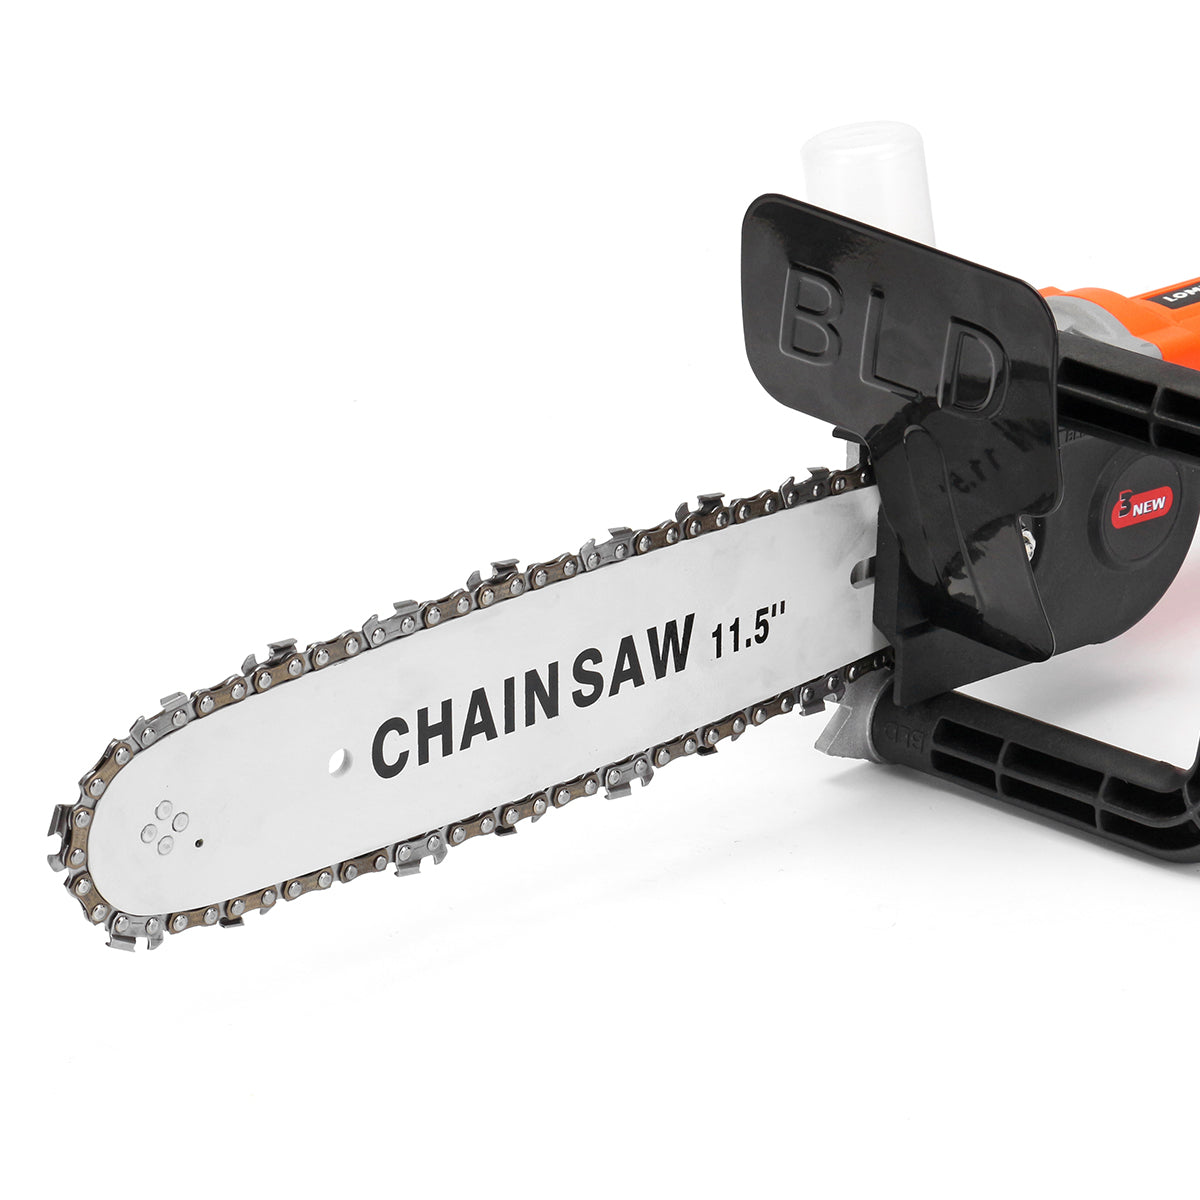 11.5 Inch Chainsaw Bracket Chain Saw Transfer Conversion Head set For 100 Angle Grinder